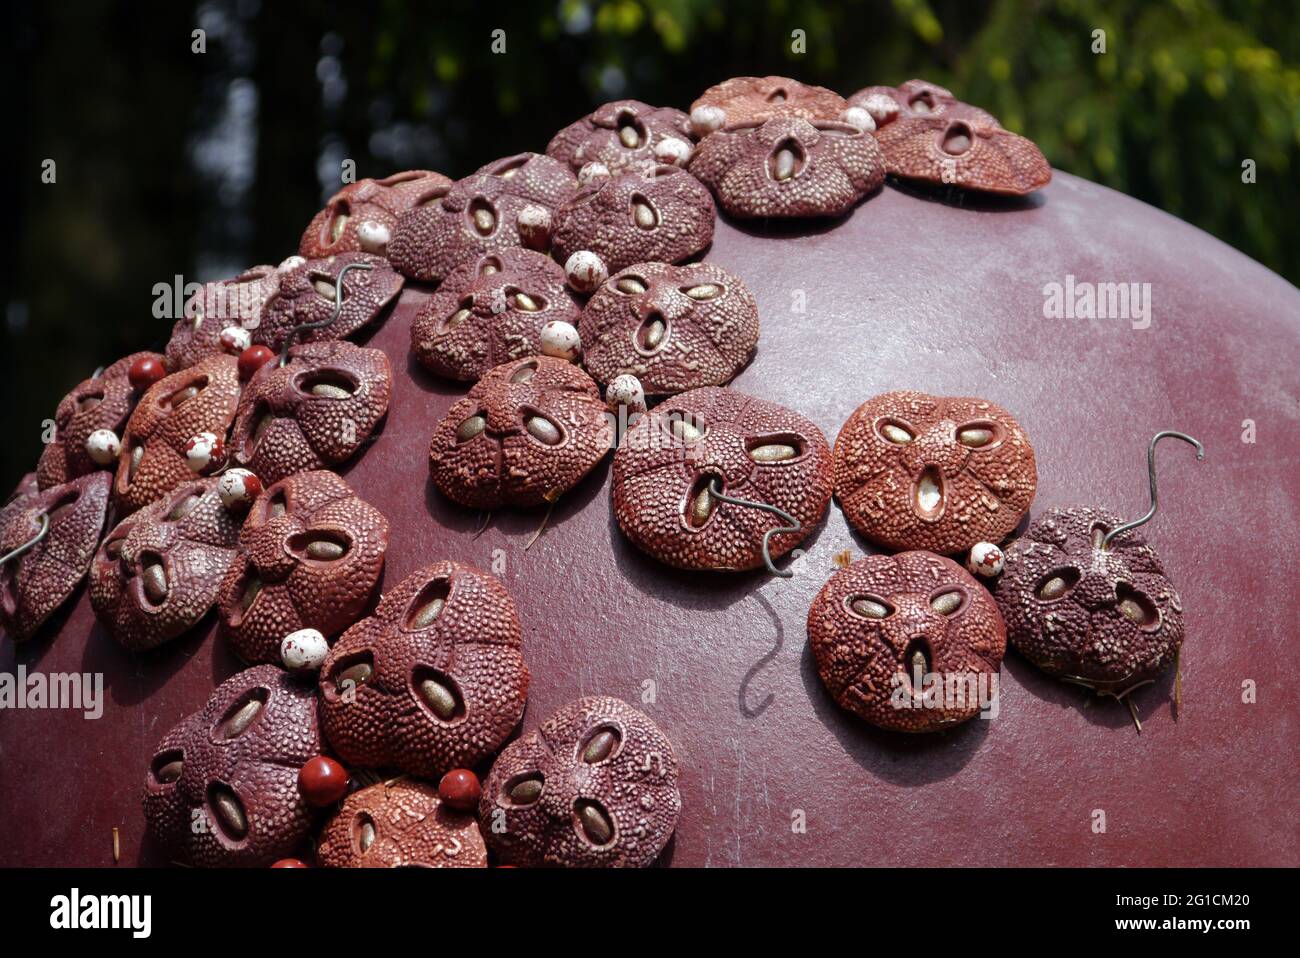 Balls with Giant Clay Pollen Grains 'Rhodi Torana' on Display at the Himalayan Garden & Sculpture Park, Grewelthorpe, Ripon, North Yorkshire Stock Photo